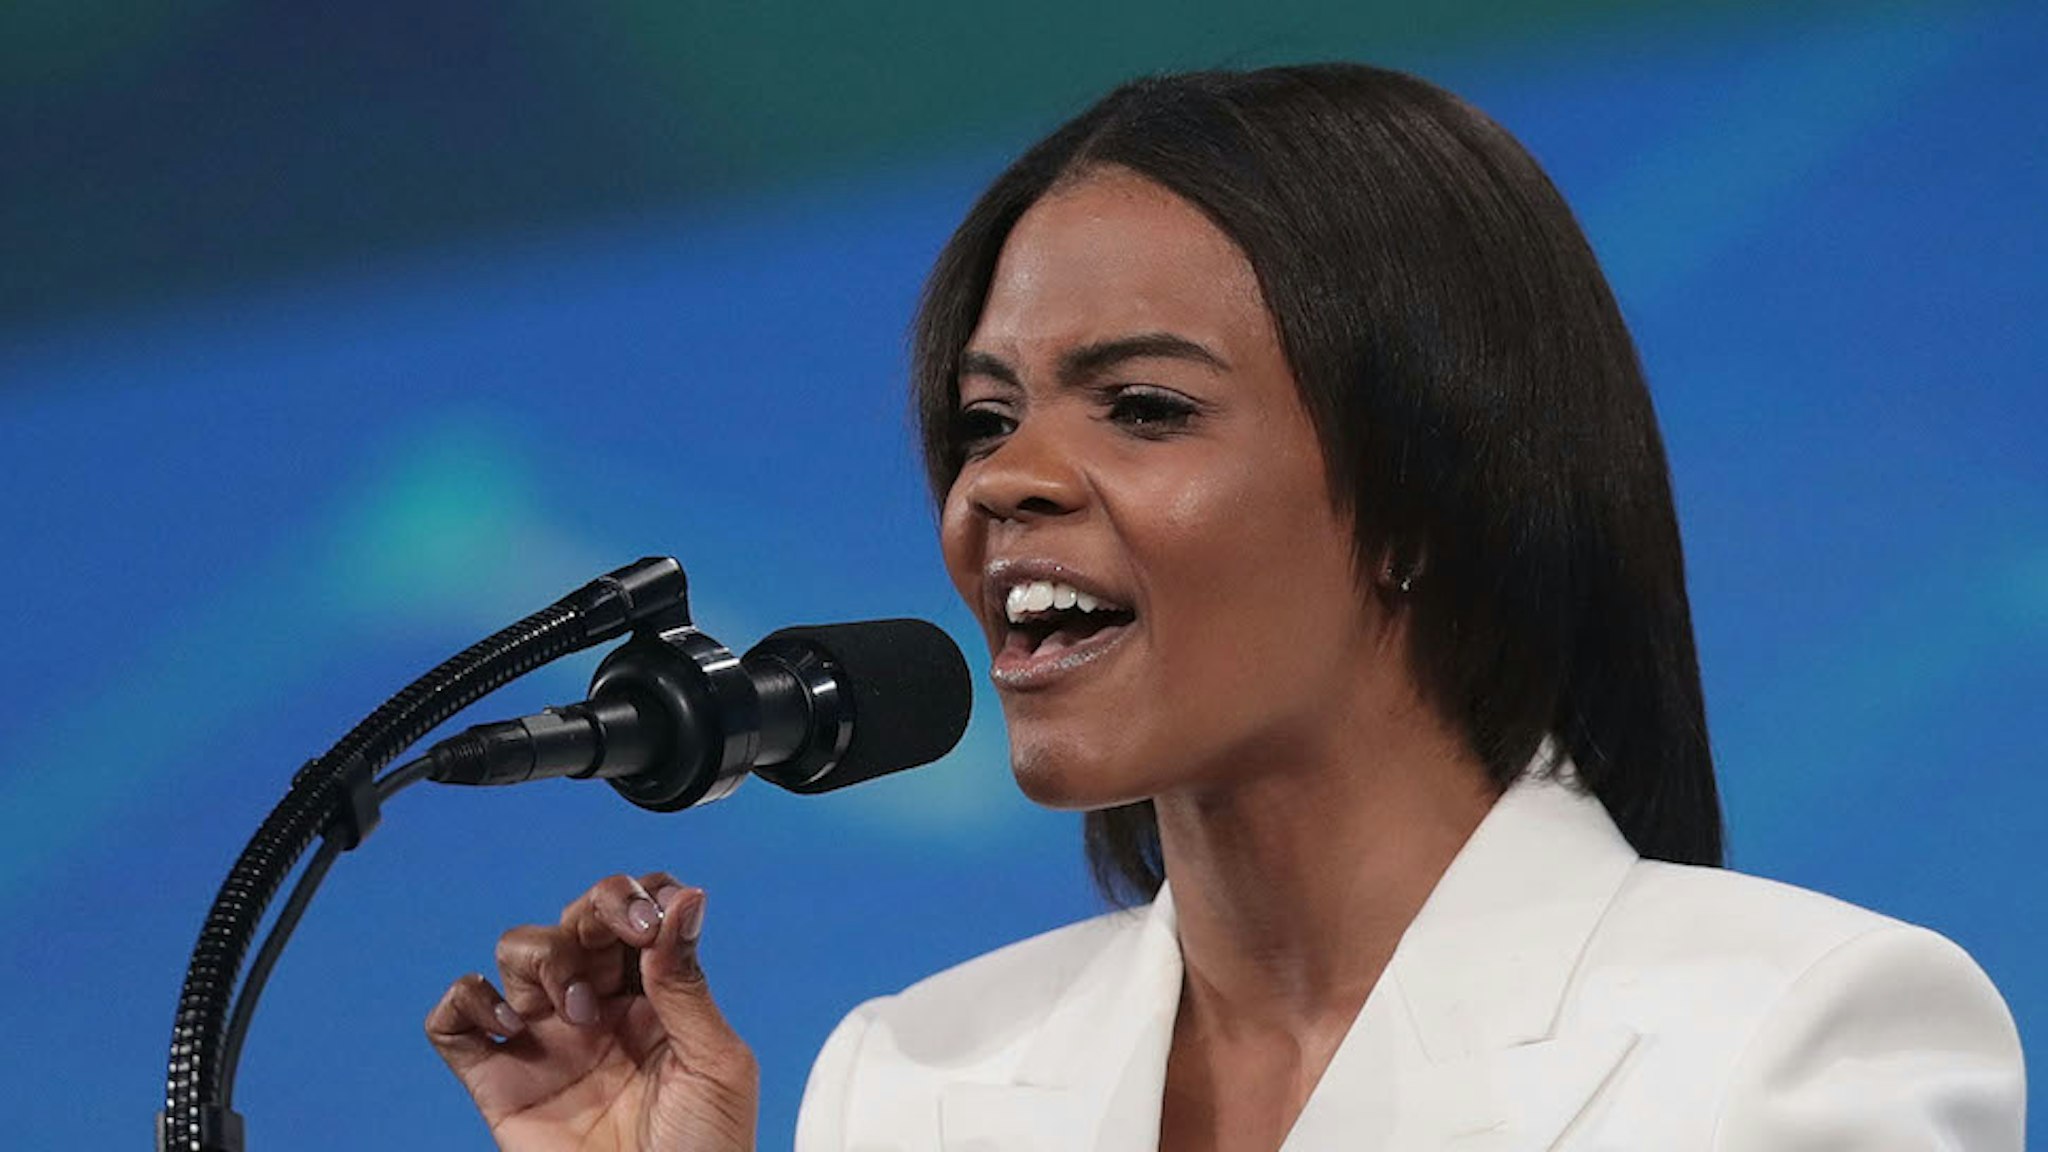 Activist Candace Owens speaks to guests during the NRA-ILA Leadership Forum at the 148th NRA Annual Meetings &amp; Exhibits on April 26, 2019 in Indianapolis, Indiana. The convention, which runs through Sunday, features more than 800 exhibitors and is expected to draw 80,000 guests. (Photo by Scott Olson/Getty Images)